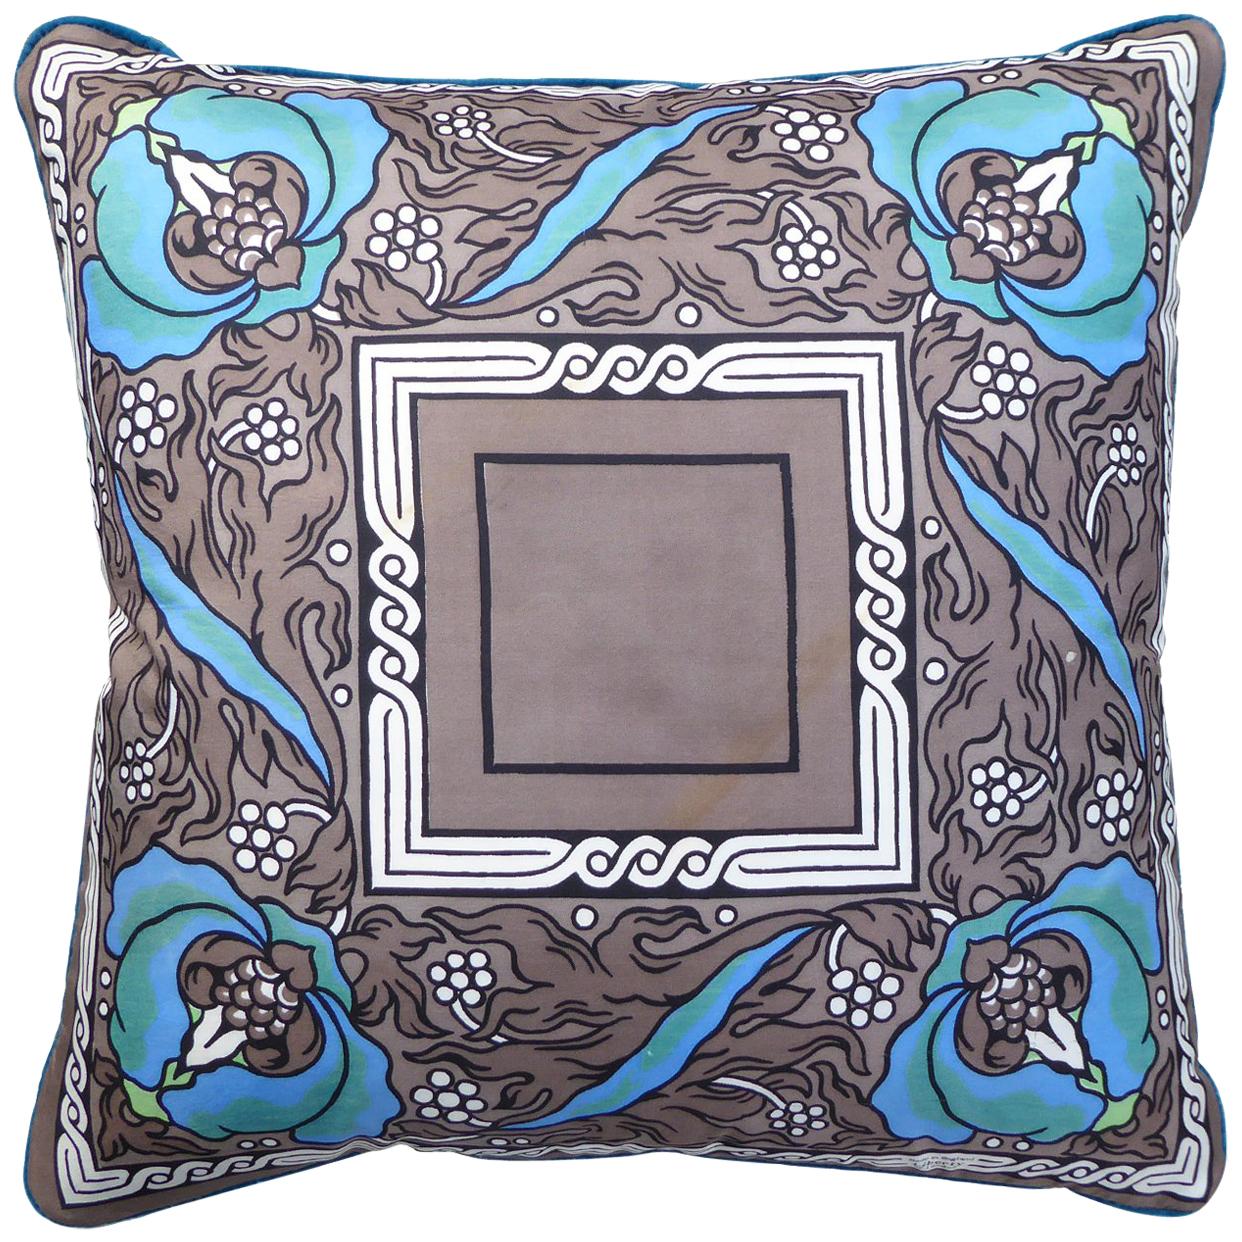 'Vintage Cushions' Luxury Bespoke Silk Pillow ‘Liberty Nouveau’, Made in London